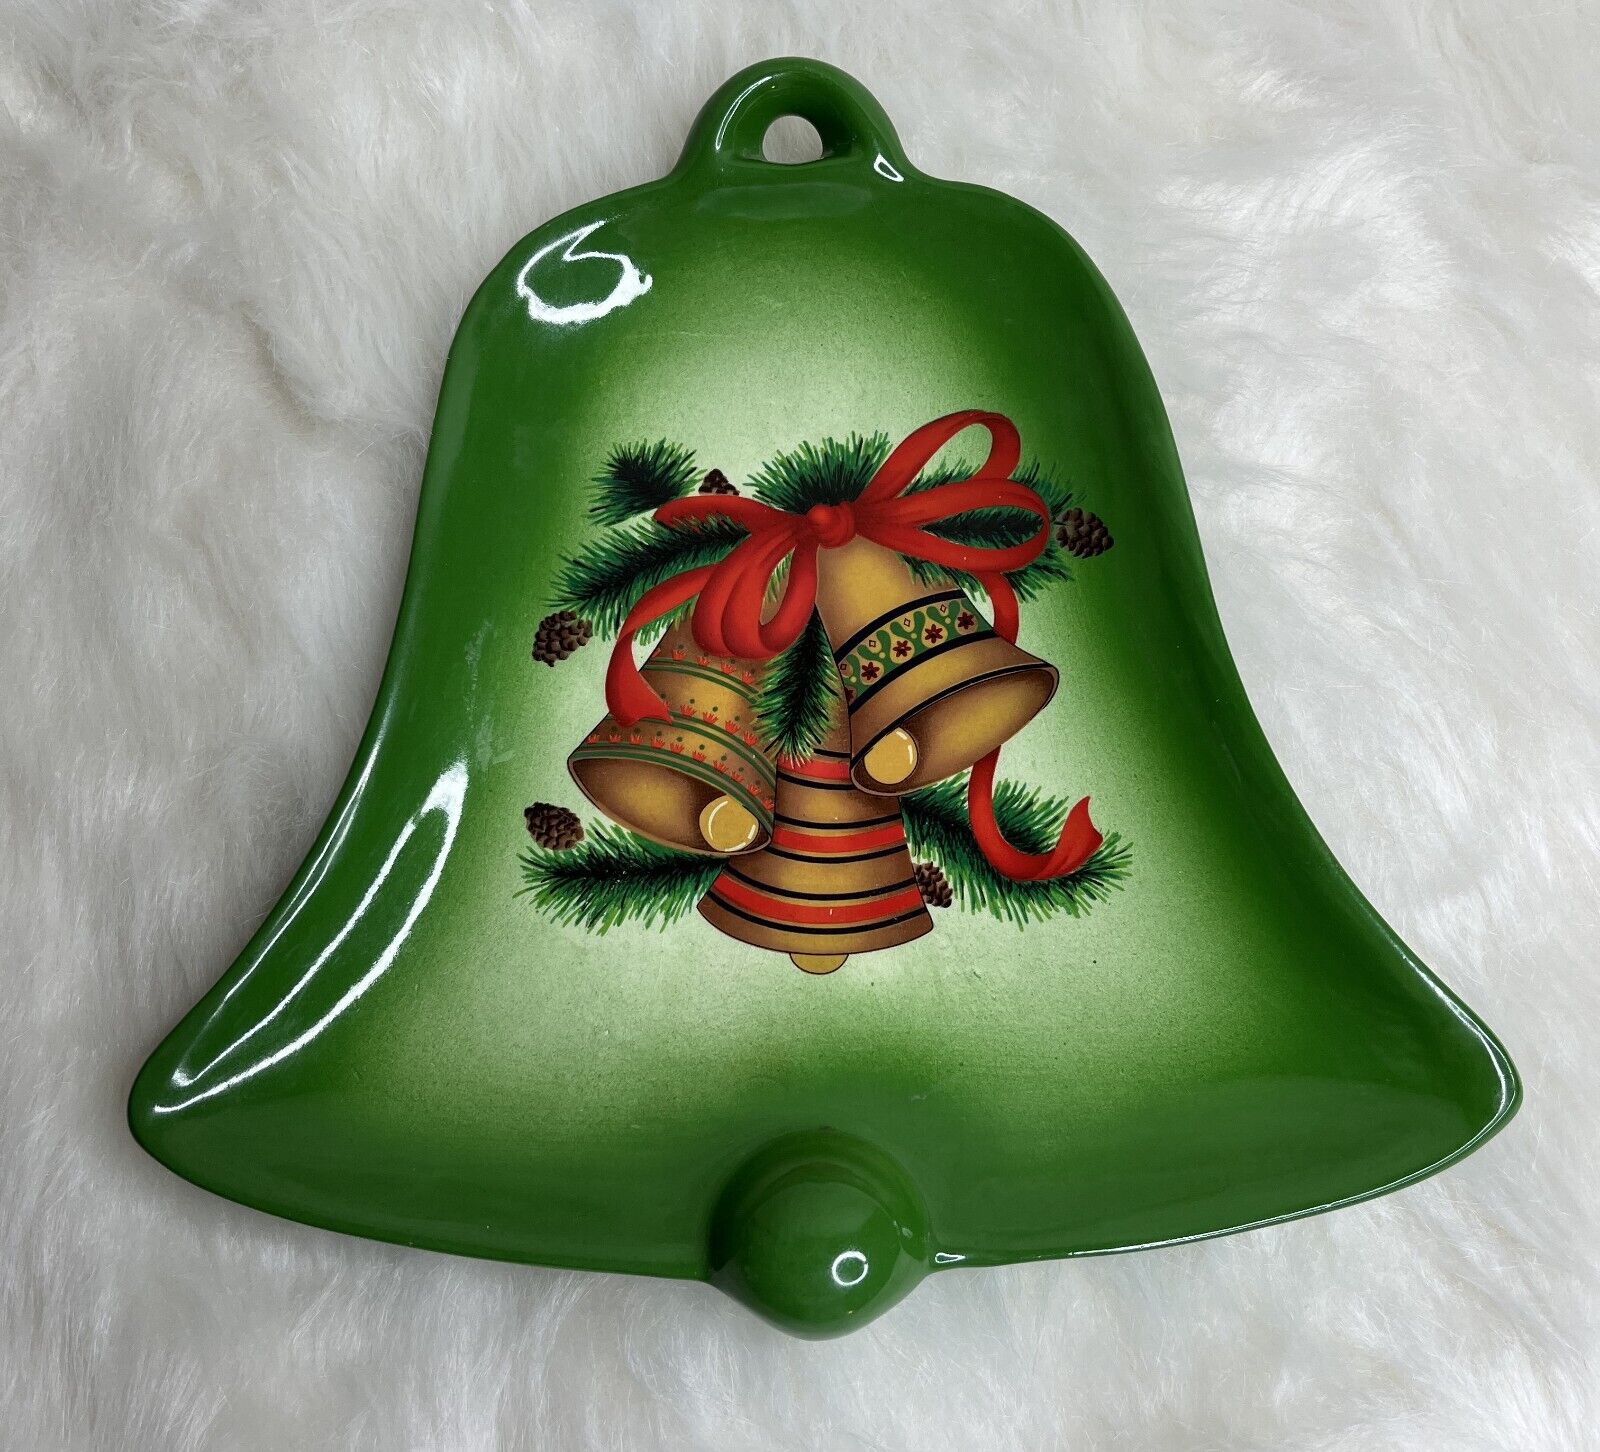 Vintage Christmas Bell Serving Tray Cookie Platter Signed 1986 Green 